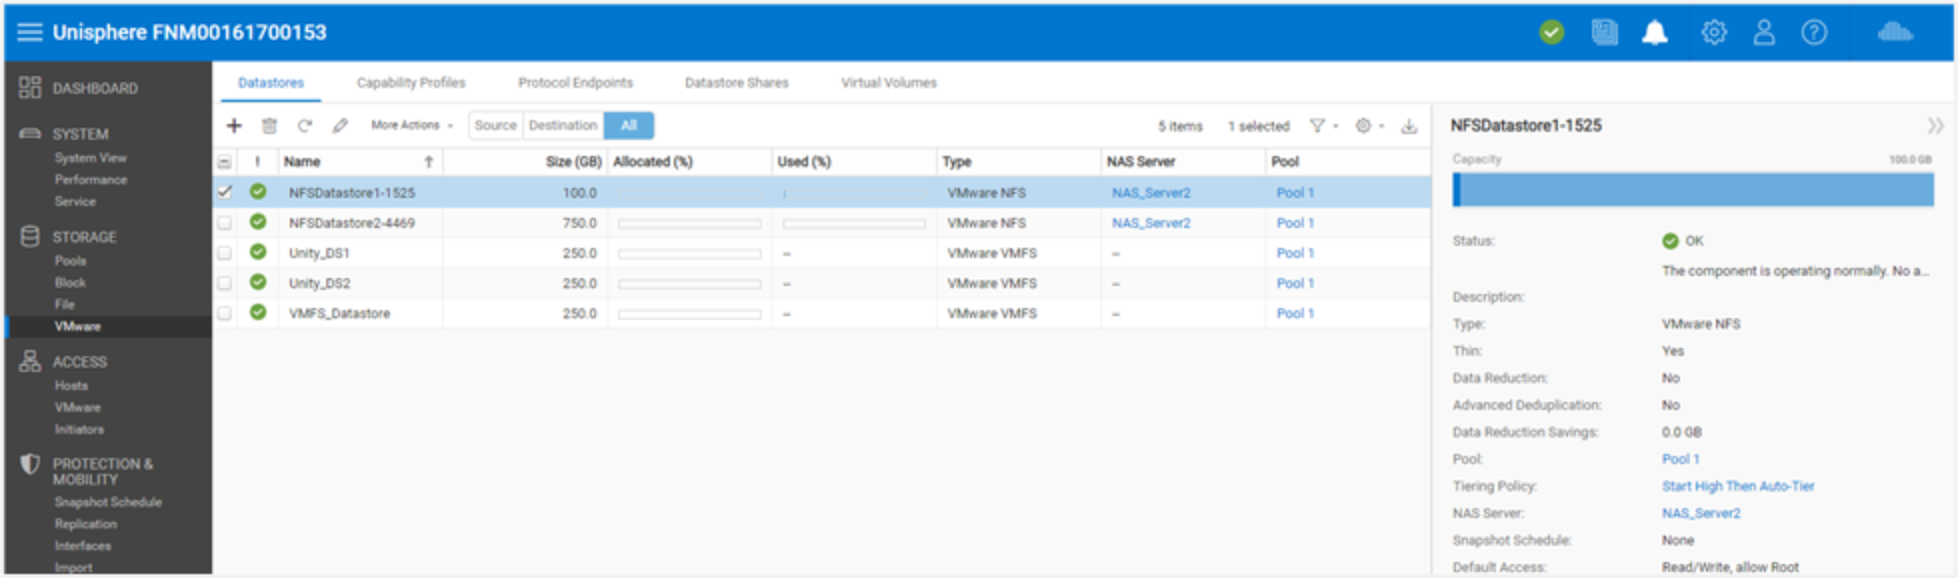 Example of a user defined VMware datastore being displayed under Unisphere's VMware  page